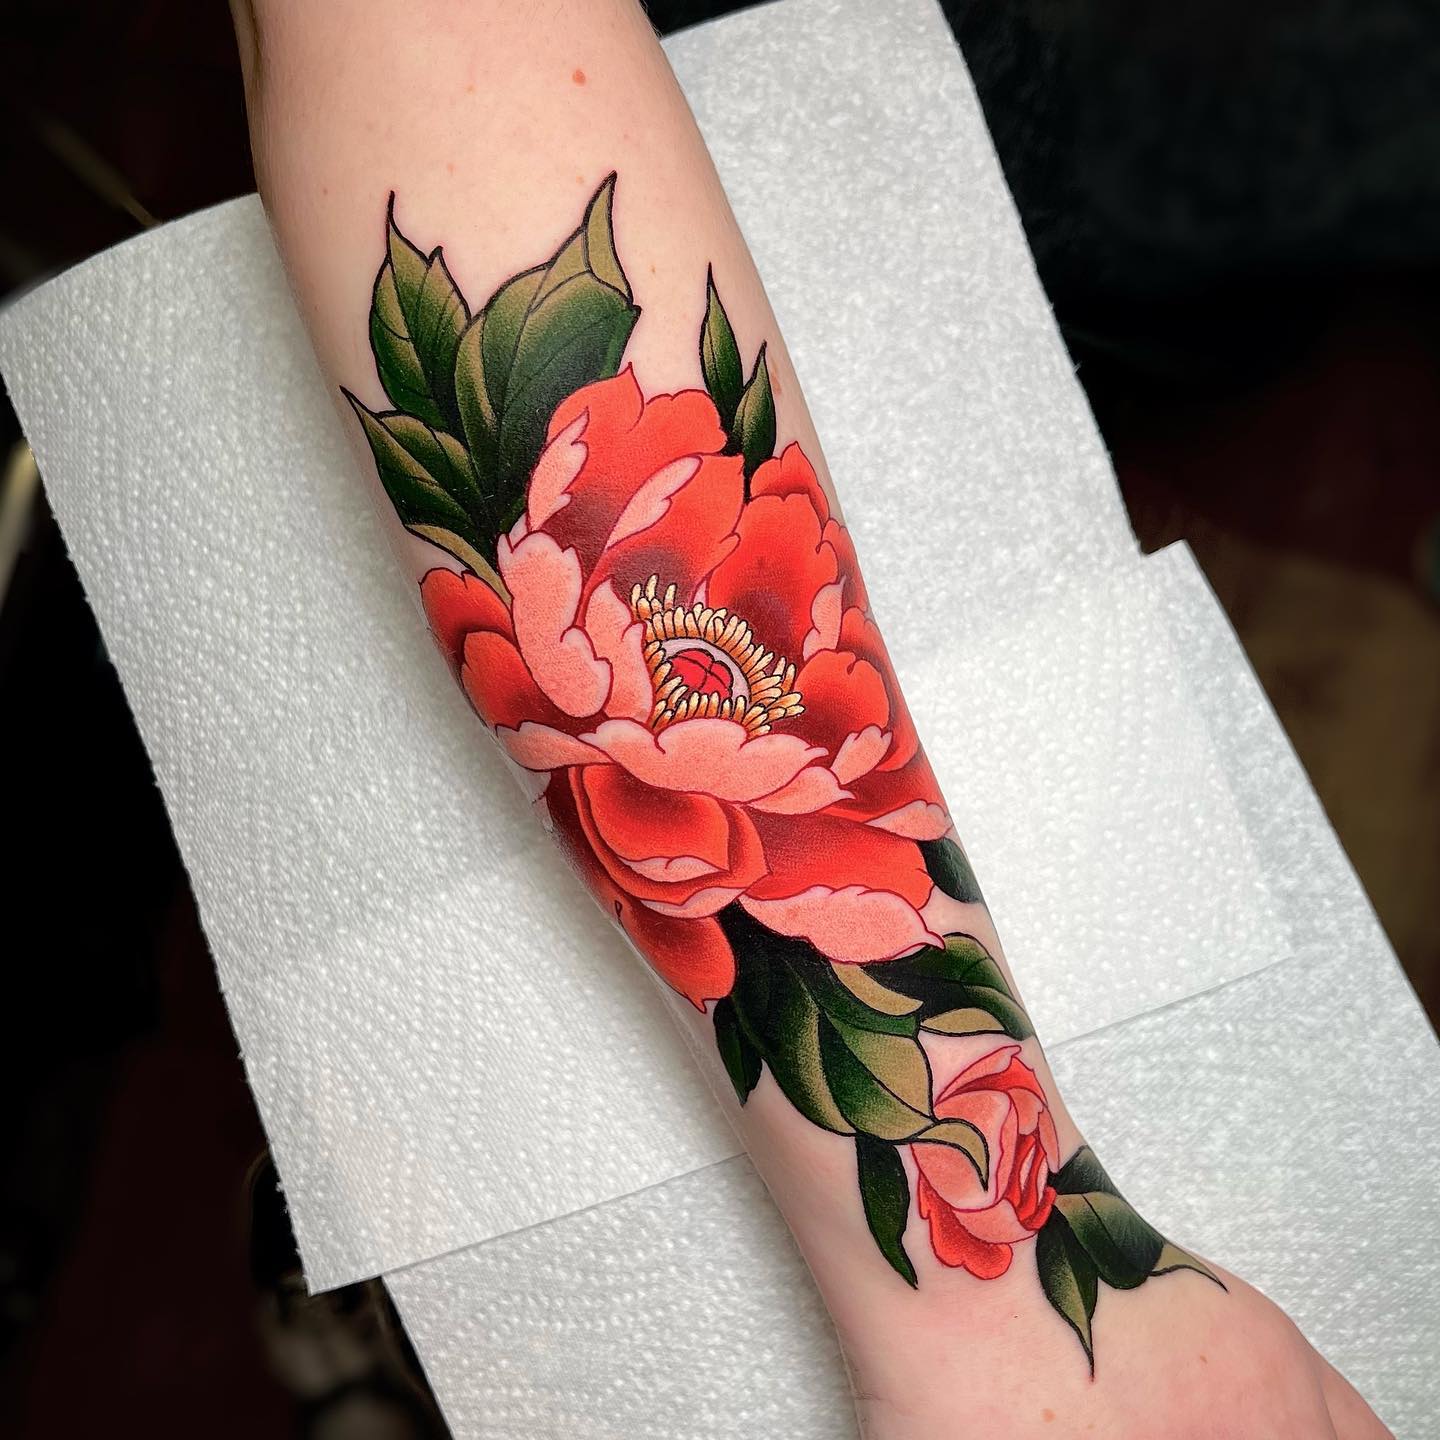 Colorful and hyperrealistic tattoo of a flower bouquet  Bouquet tattoo  Flower bouquet tattoo Pretty flower tattoos